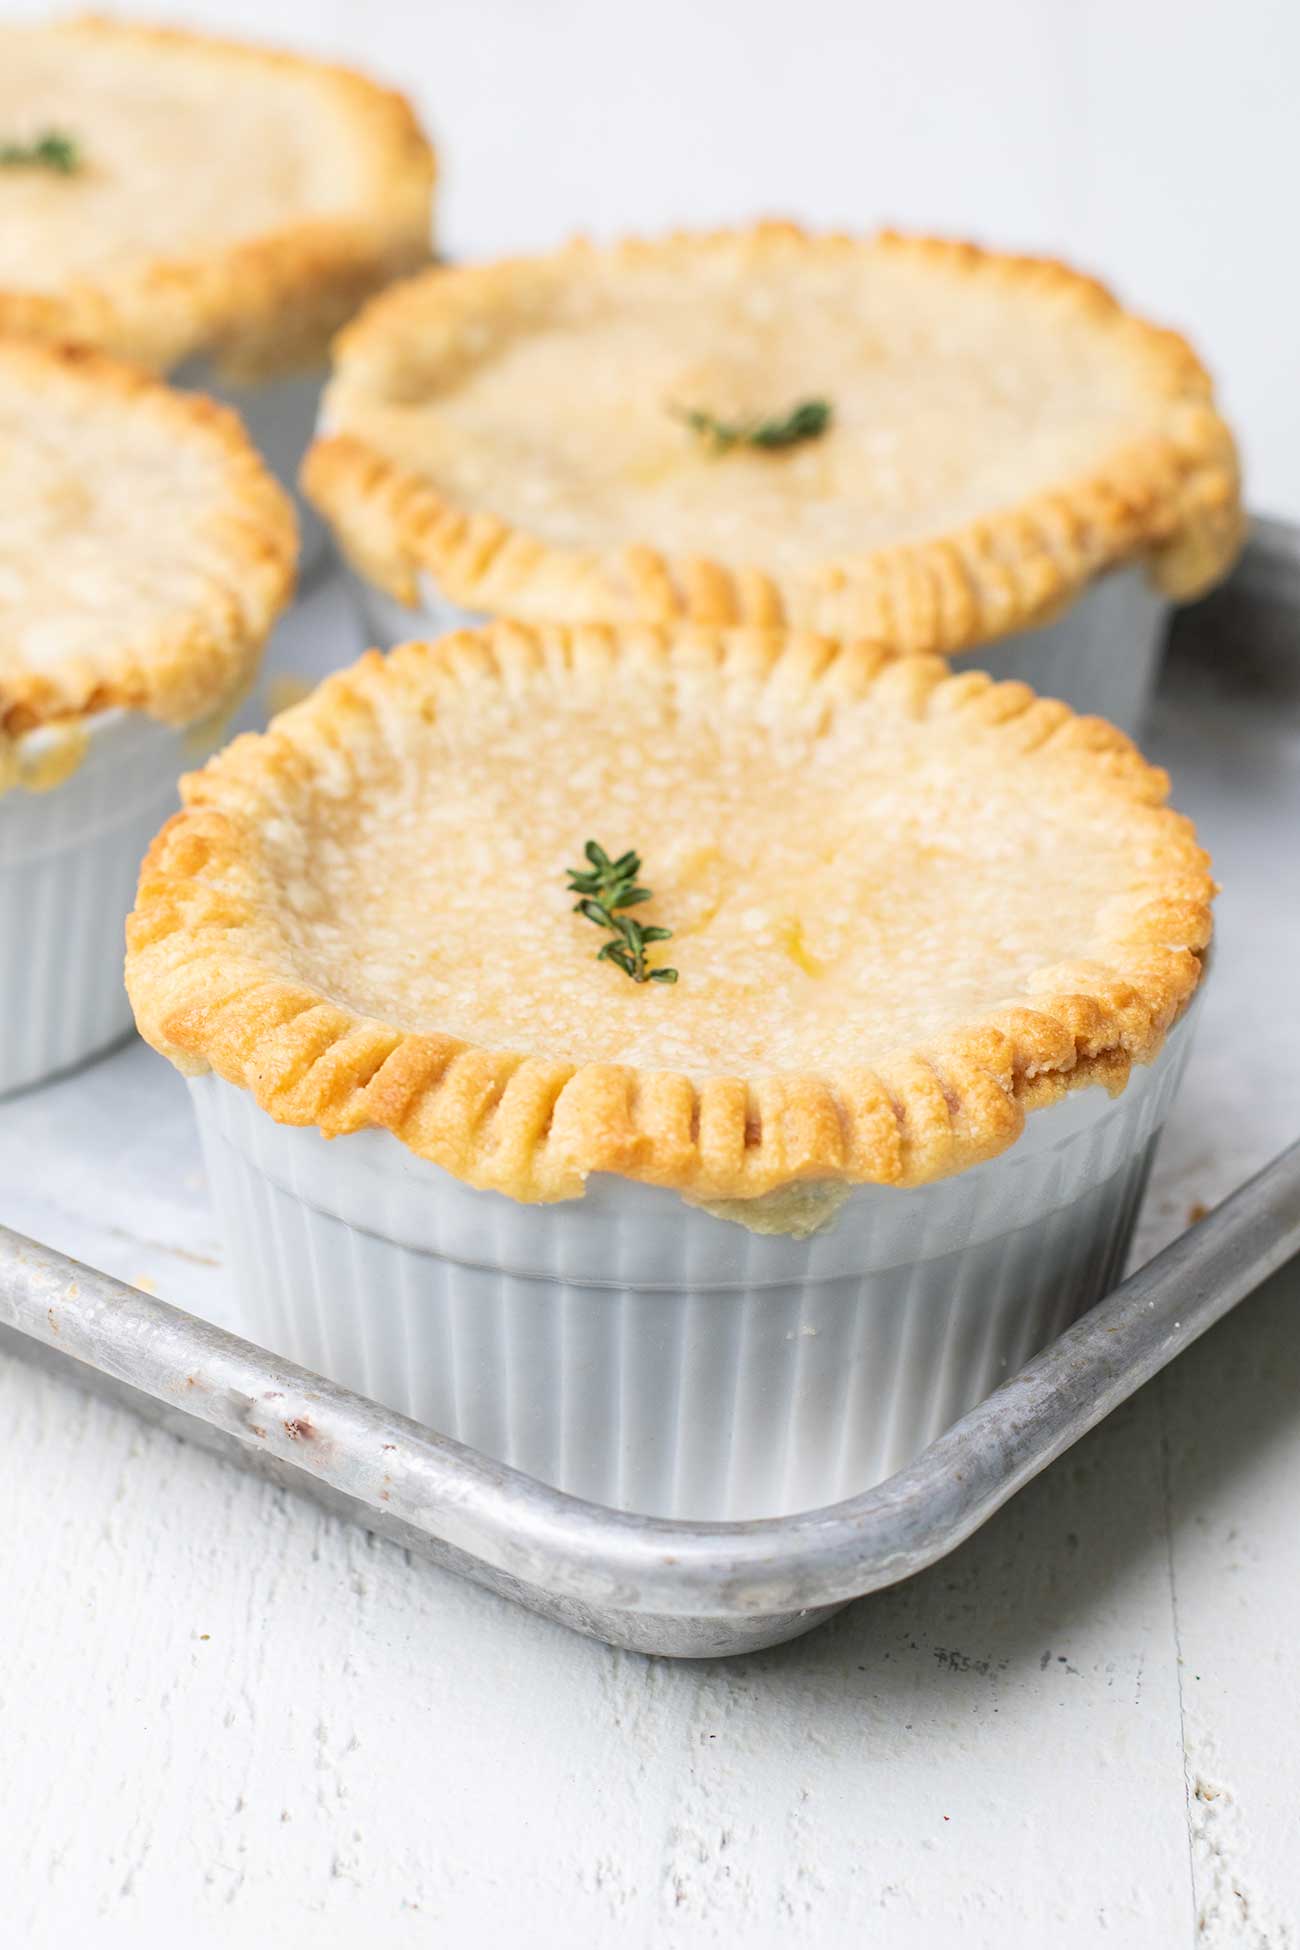 Chicken Pot pies shown with a golden brown crust garnished with thyme.